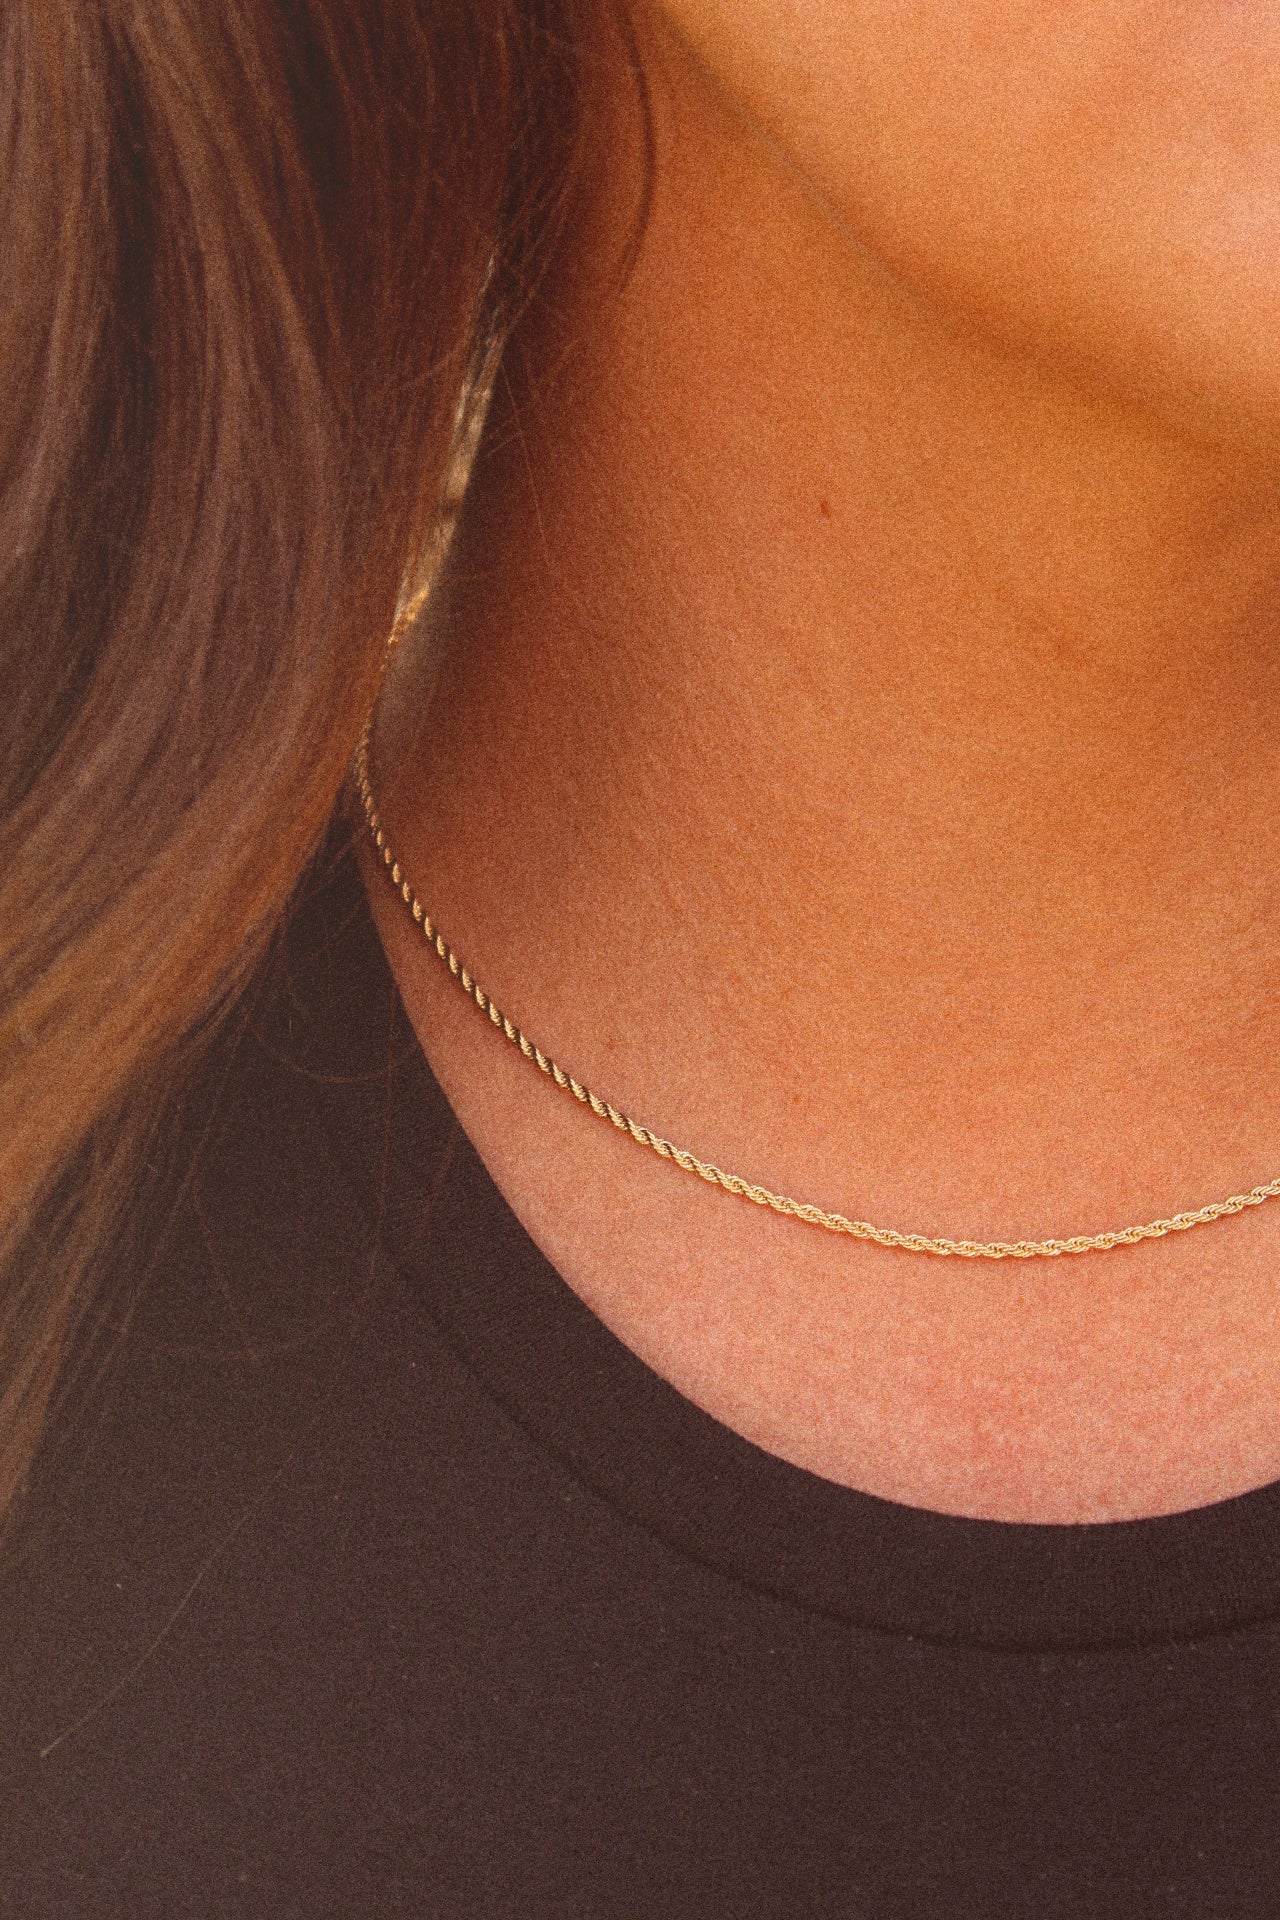 18k Gold Rope Necklace - Jewellery Hut